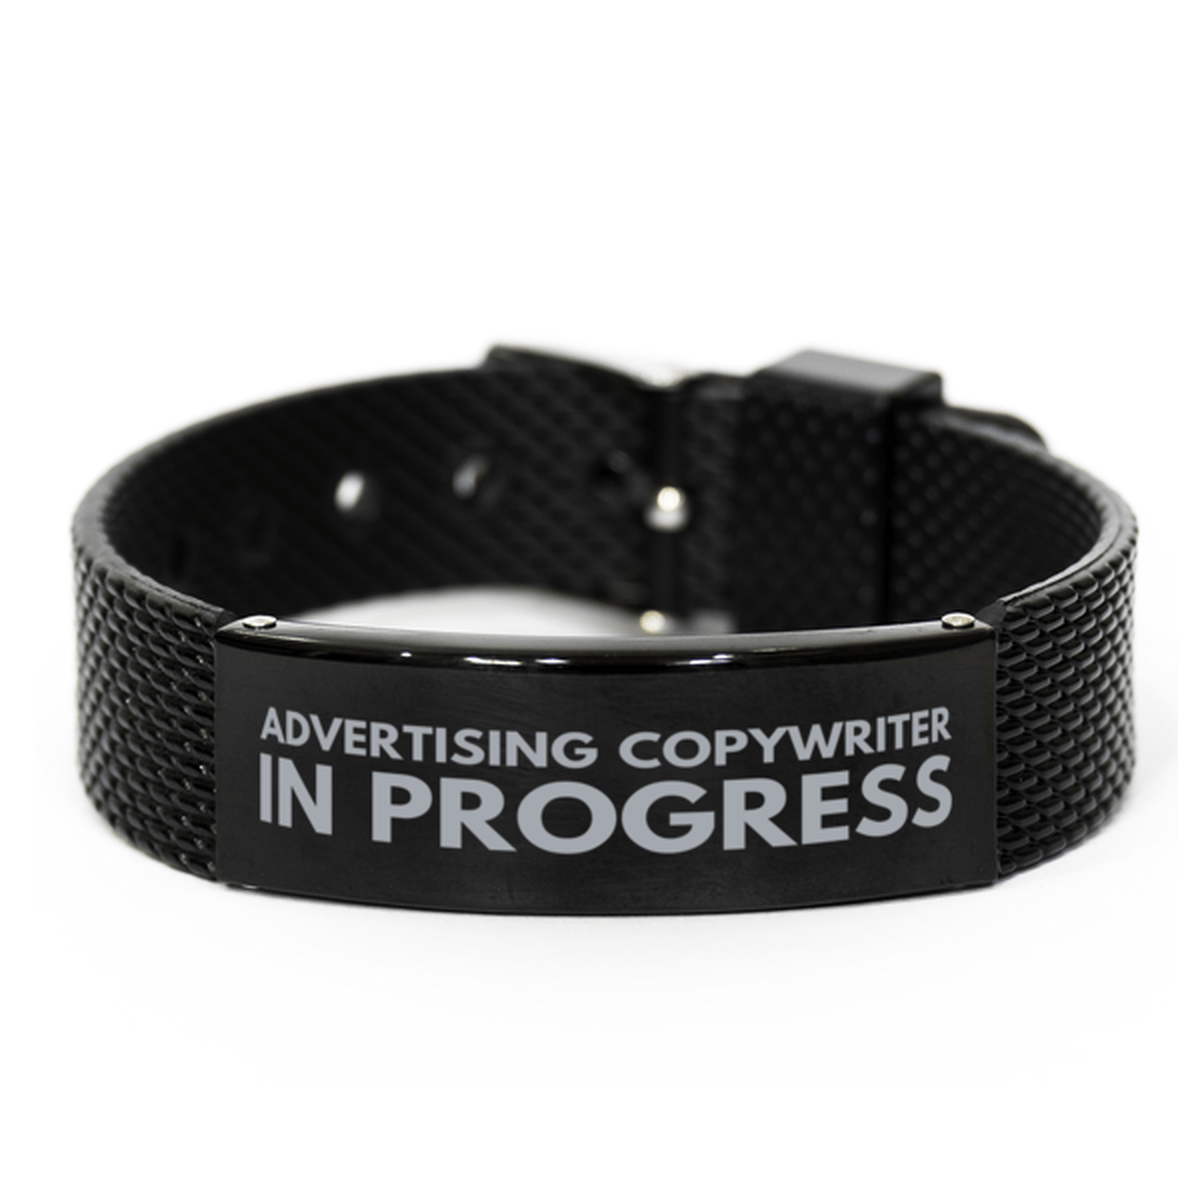 Inspirational Advertising Copywriter Black Shark Mesh Bracelet, Advertising Copywriter In Progress, Best Graduation Gifts for Students